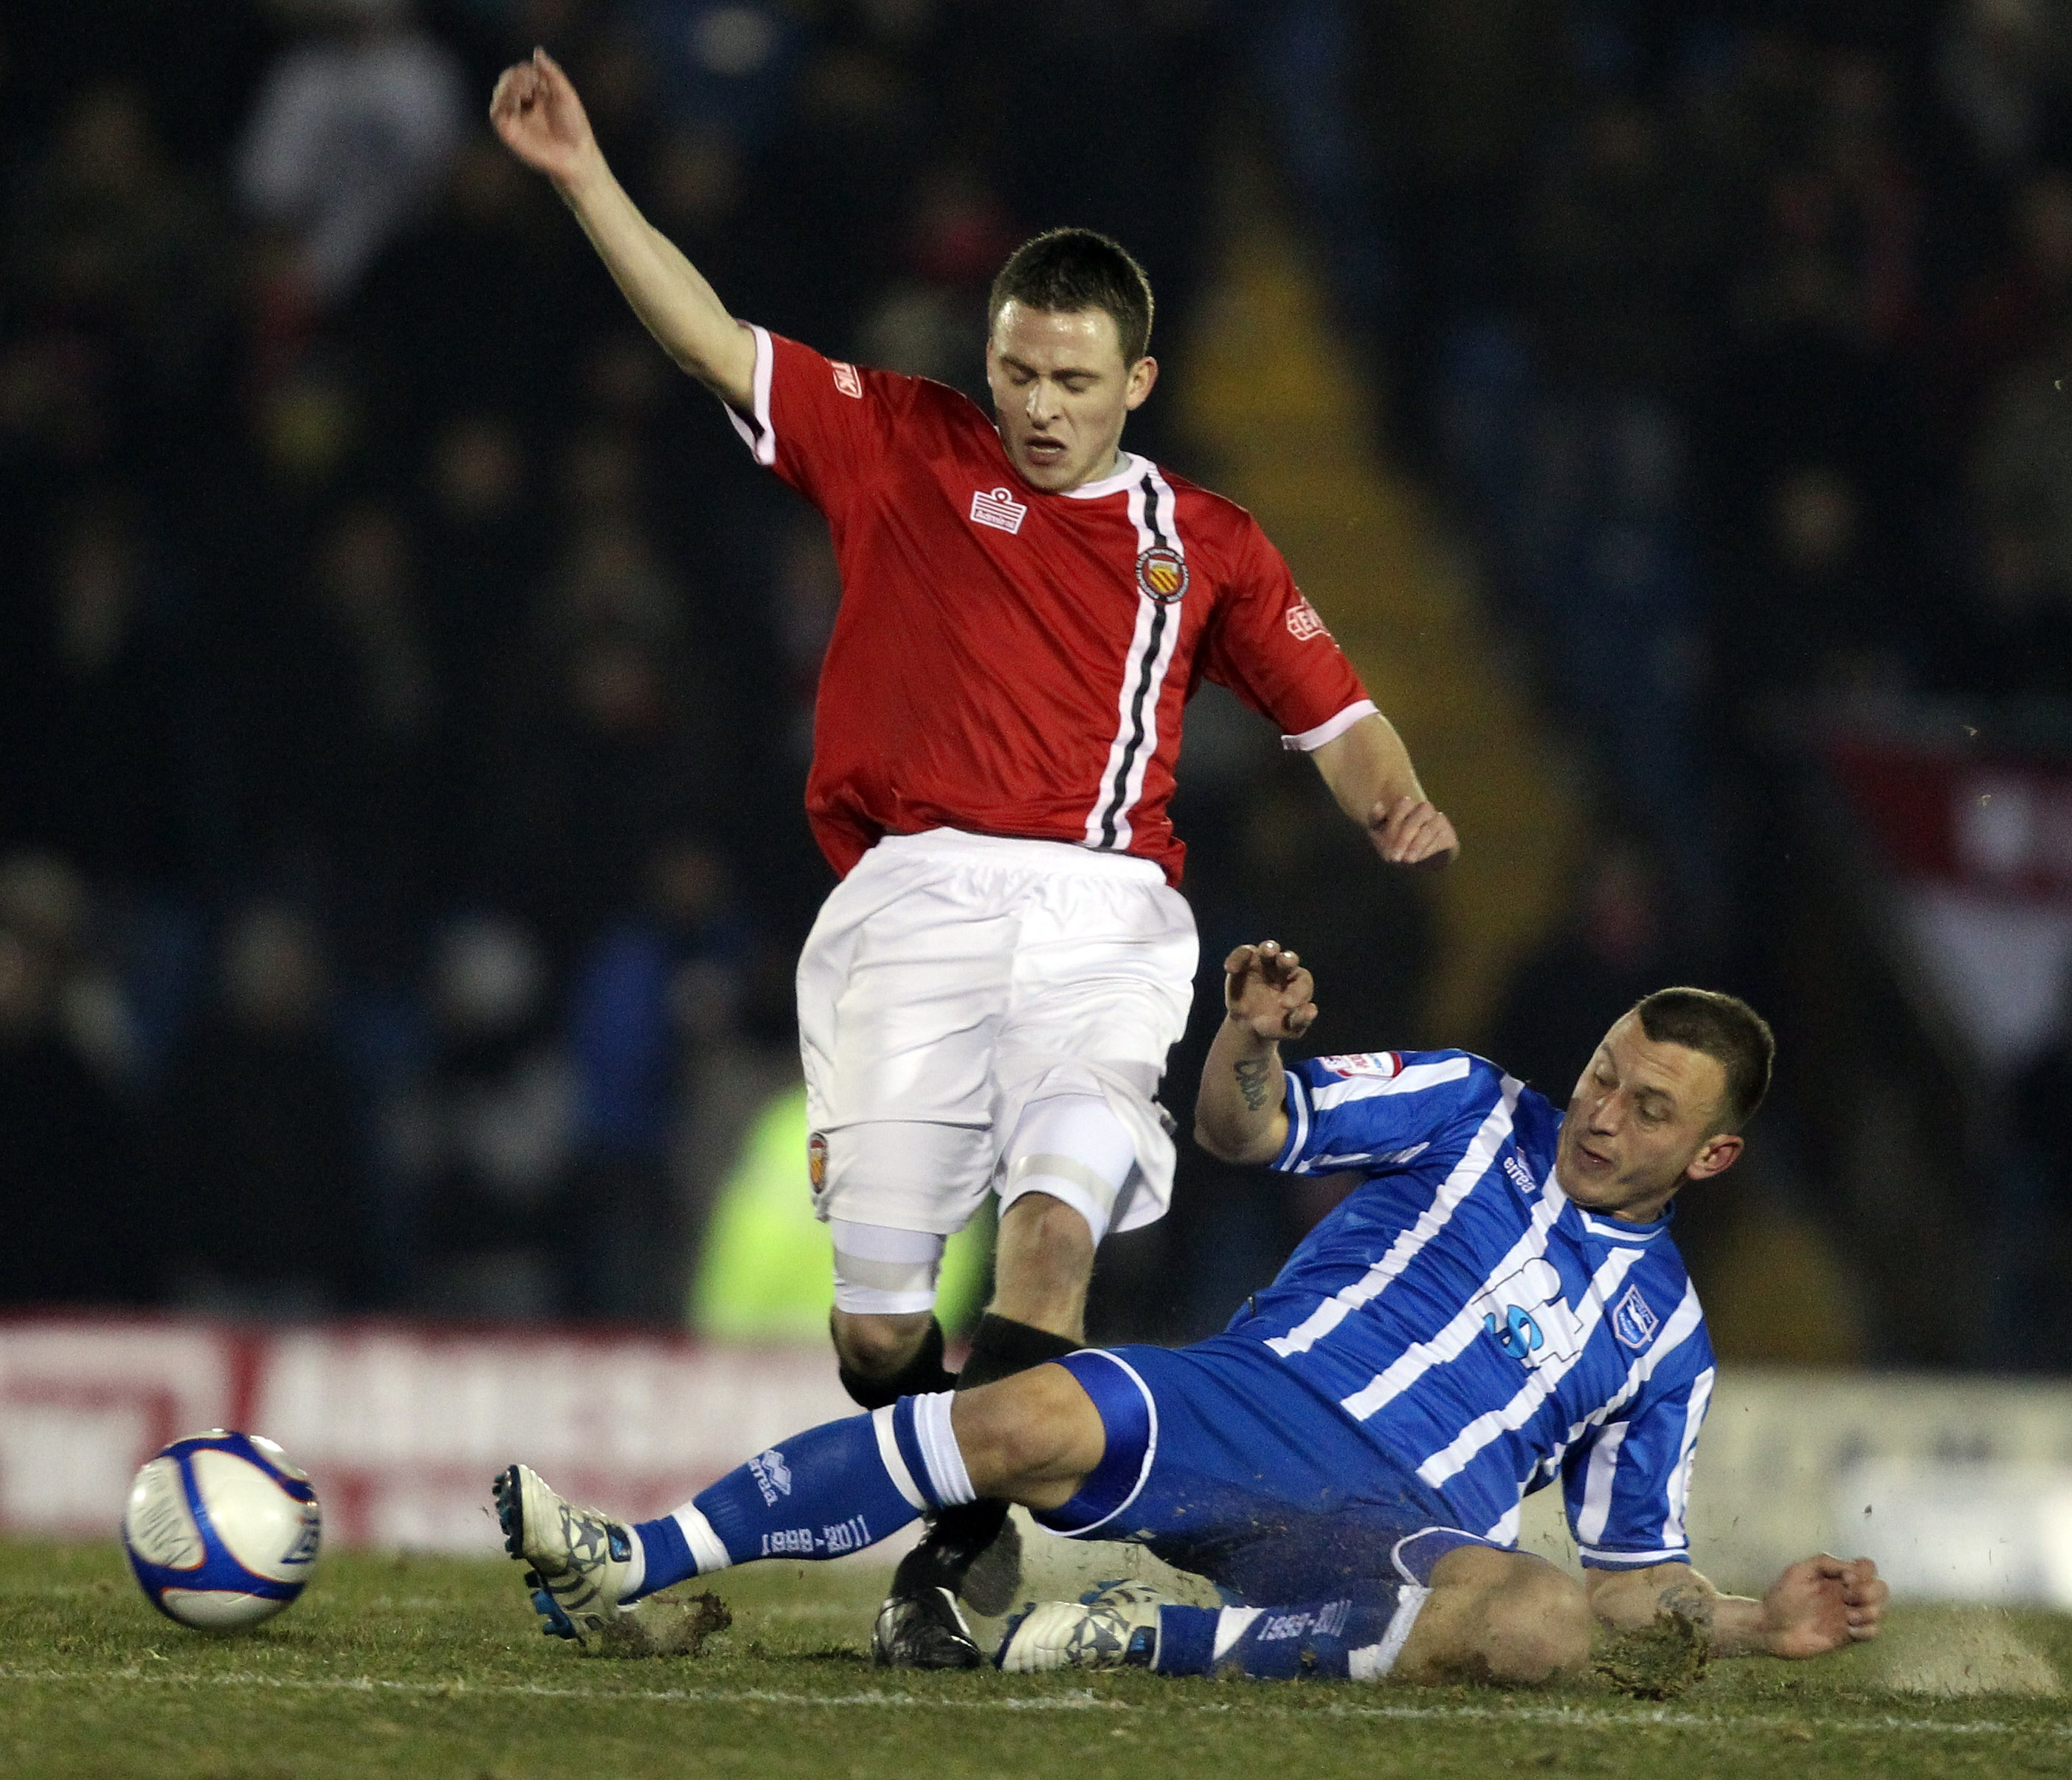 BURY, ENGLAND - DECEMBER 08:  Matthew Wolfenden of FC United is challenged by Gary Hart of Brighton  during the FA Cup sponsored by E.ON 2nd Round Replay between FC United of Manchester and Brighton & Hove Albion at Gigg Lane on December 8, 2010 in Bury,